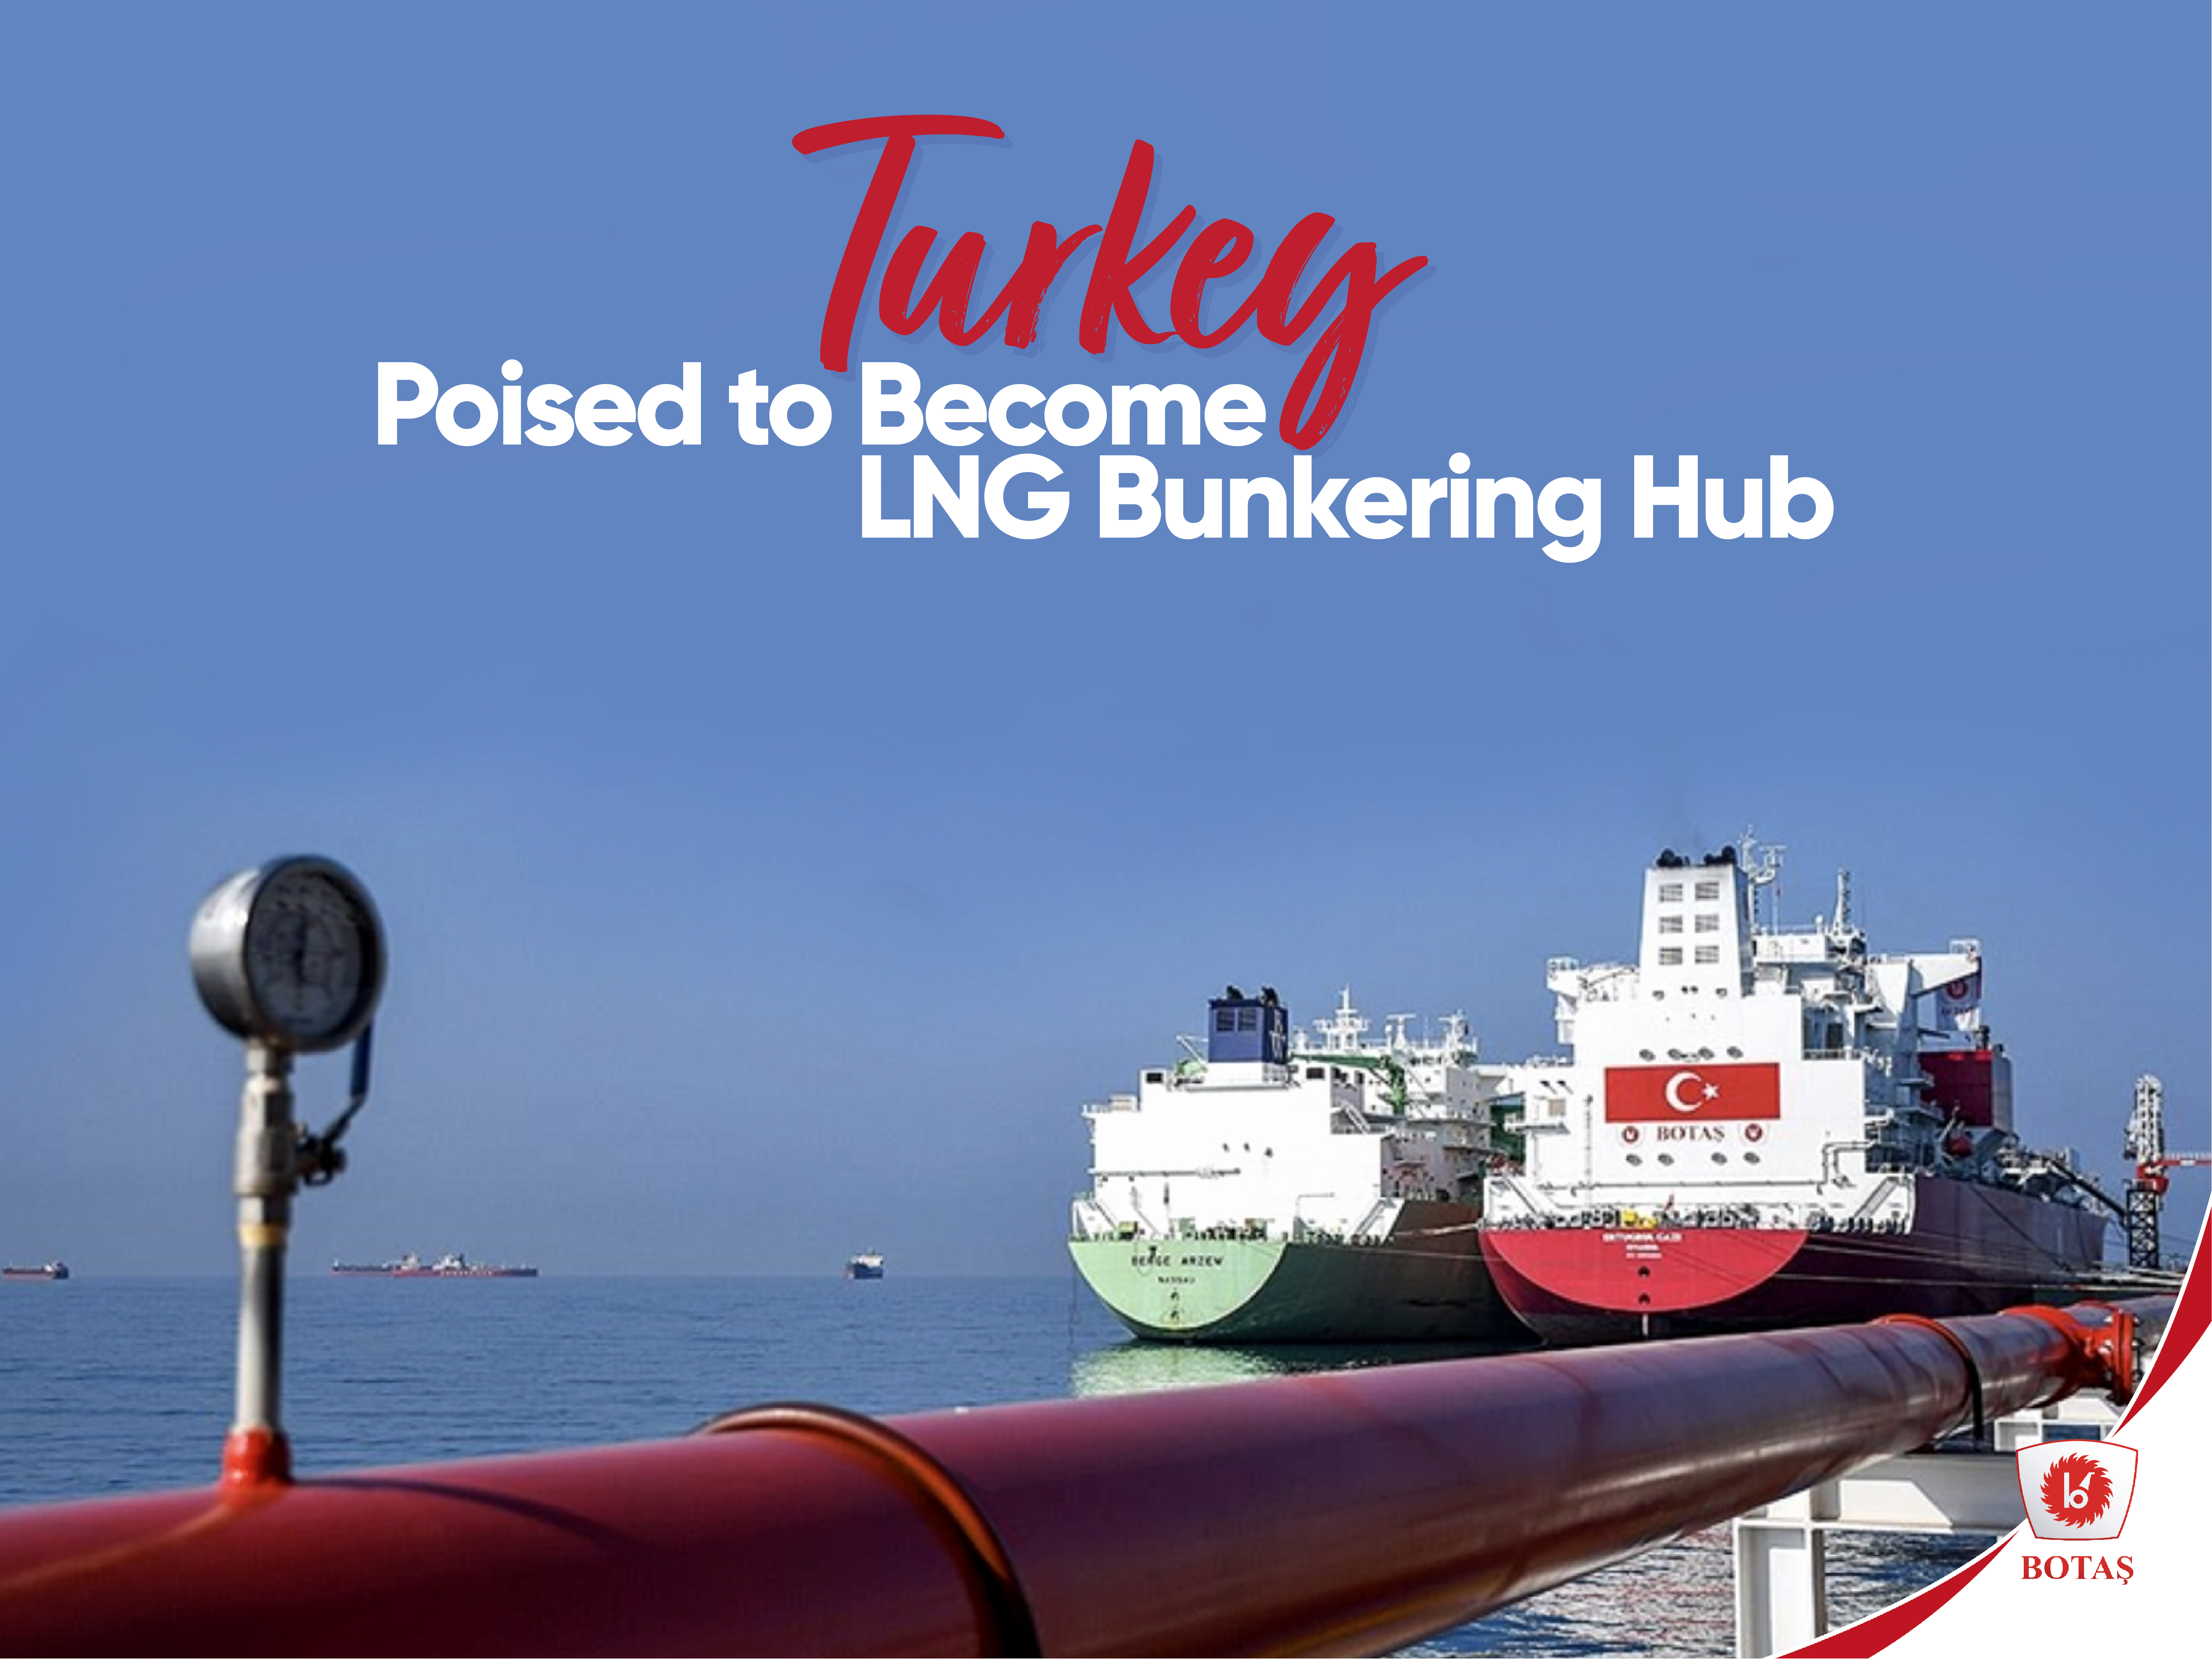 Turkey Poised to Become LNG Bunkering Hub